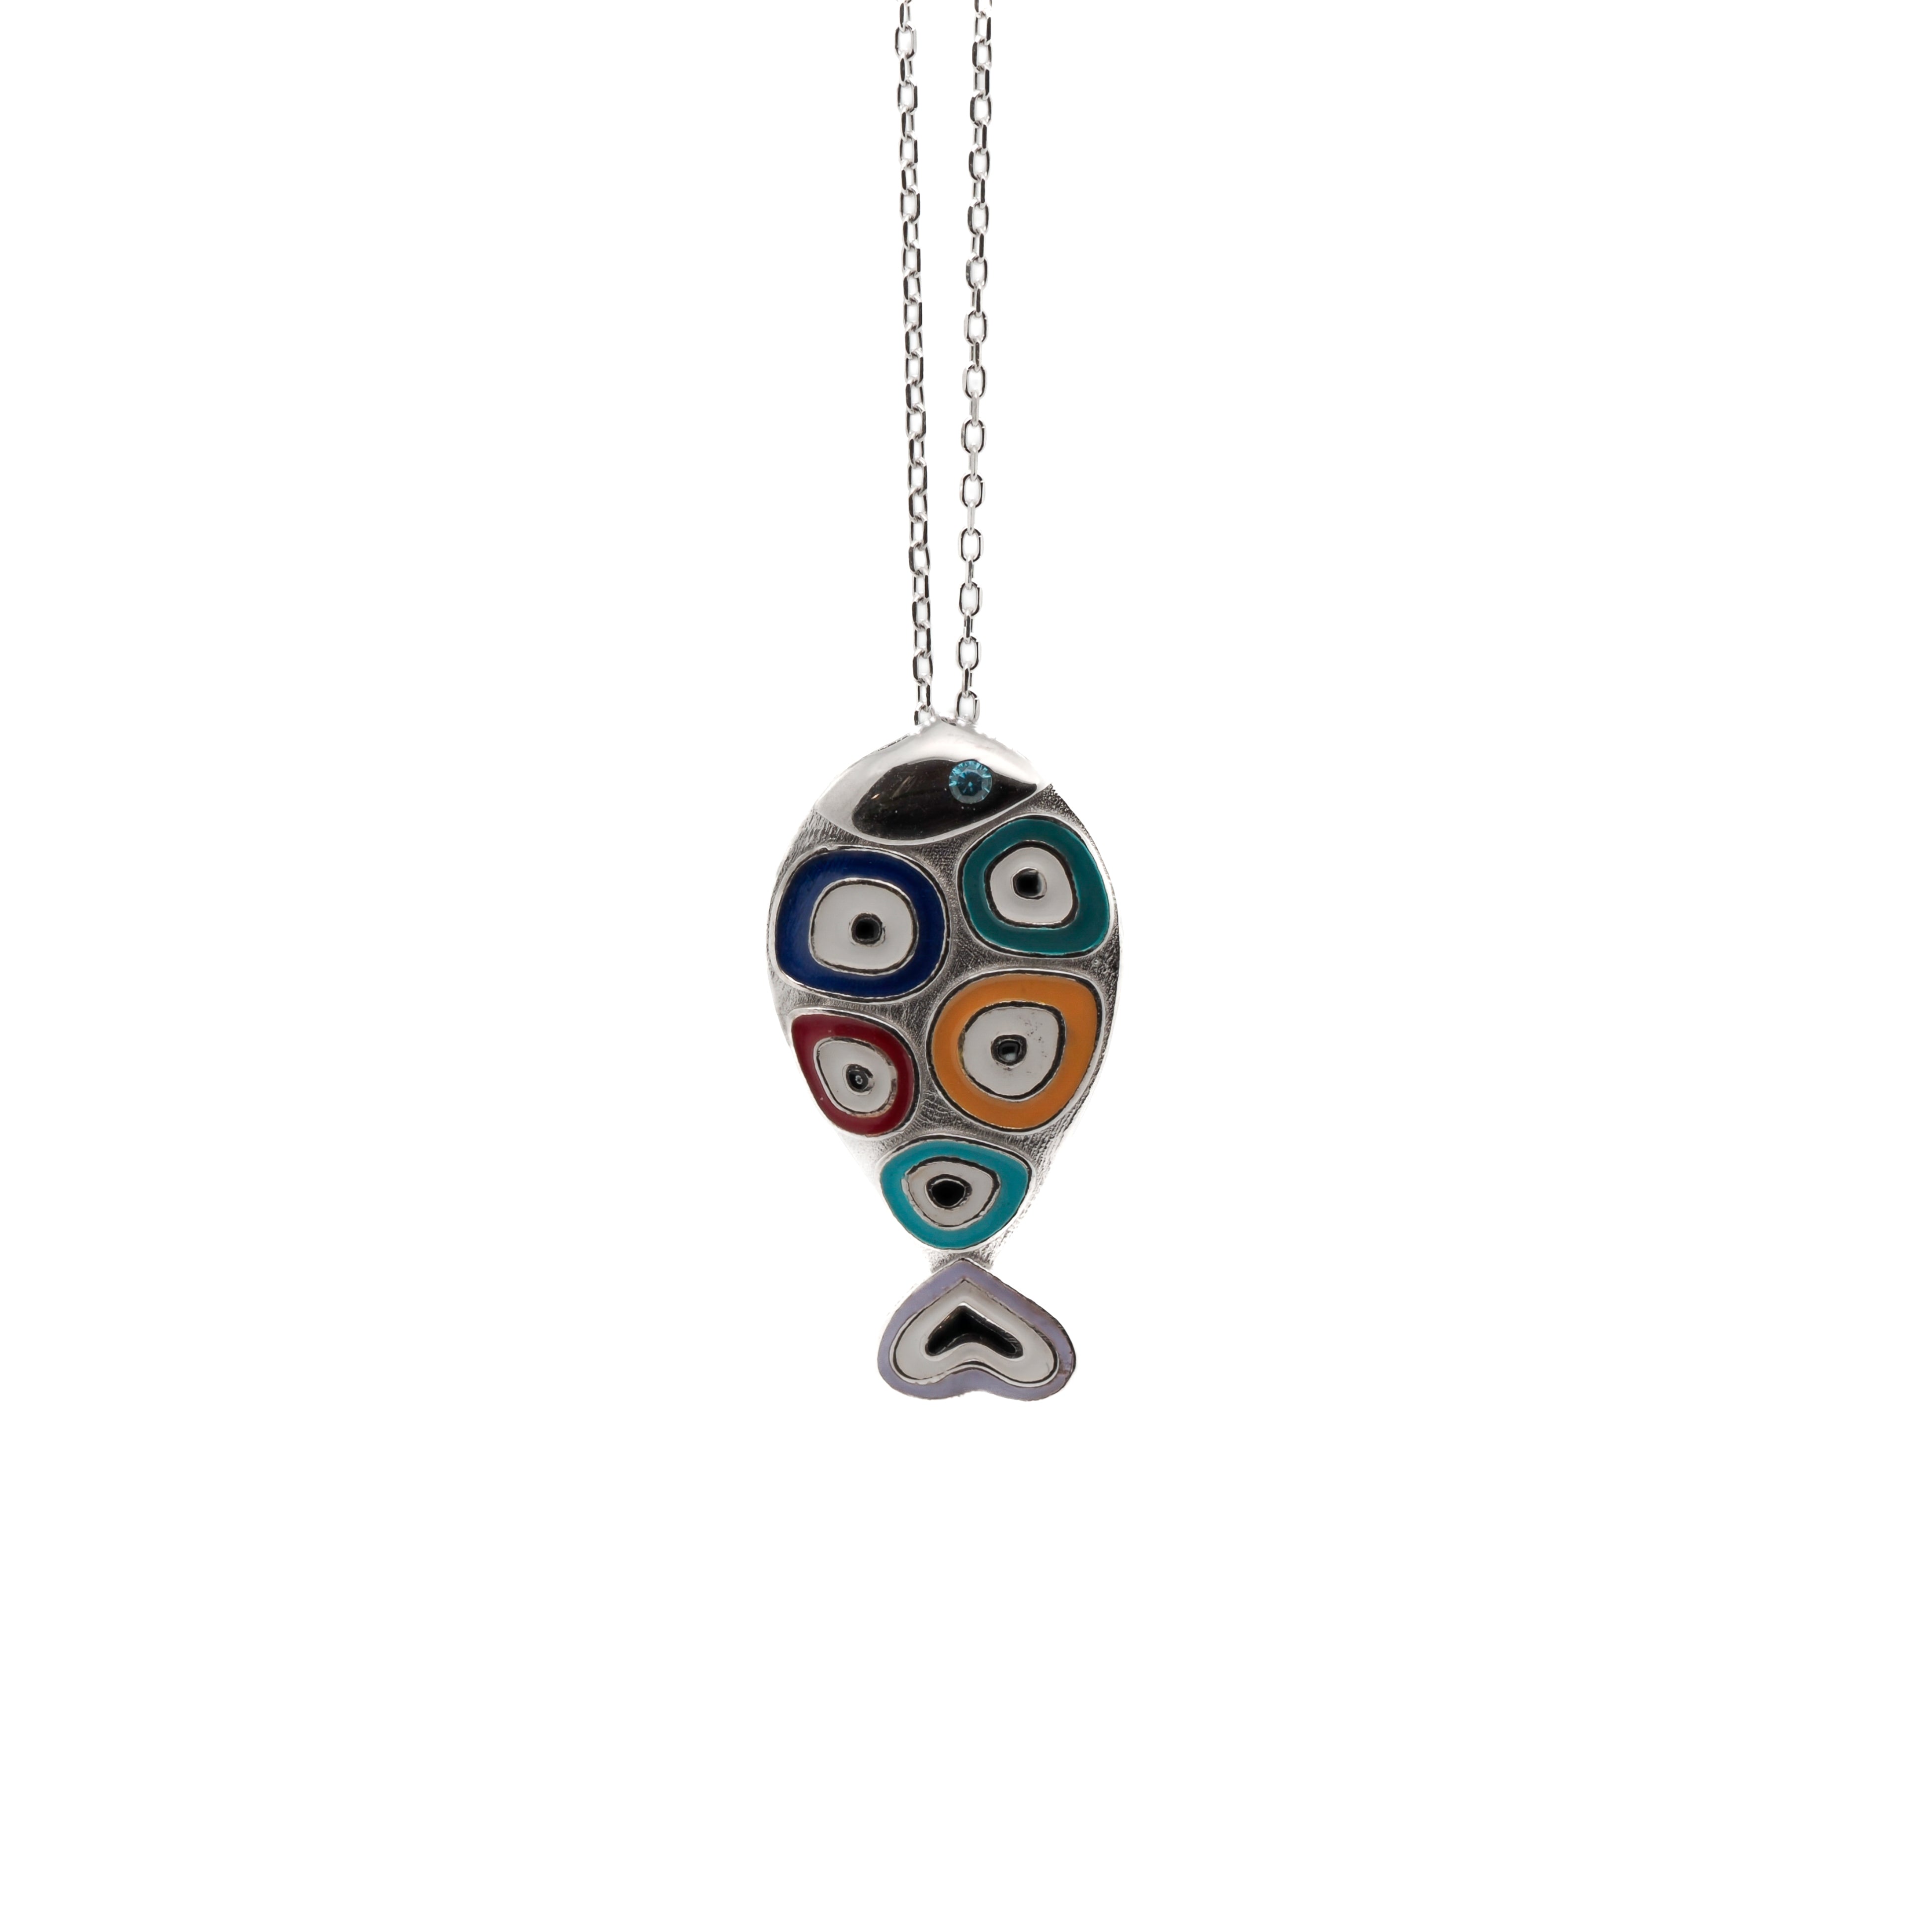 The Silver Evil Eye Fish Necklace, a stylish and spiritual piece that brings together elements of good luck and protection.